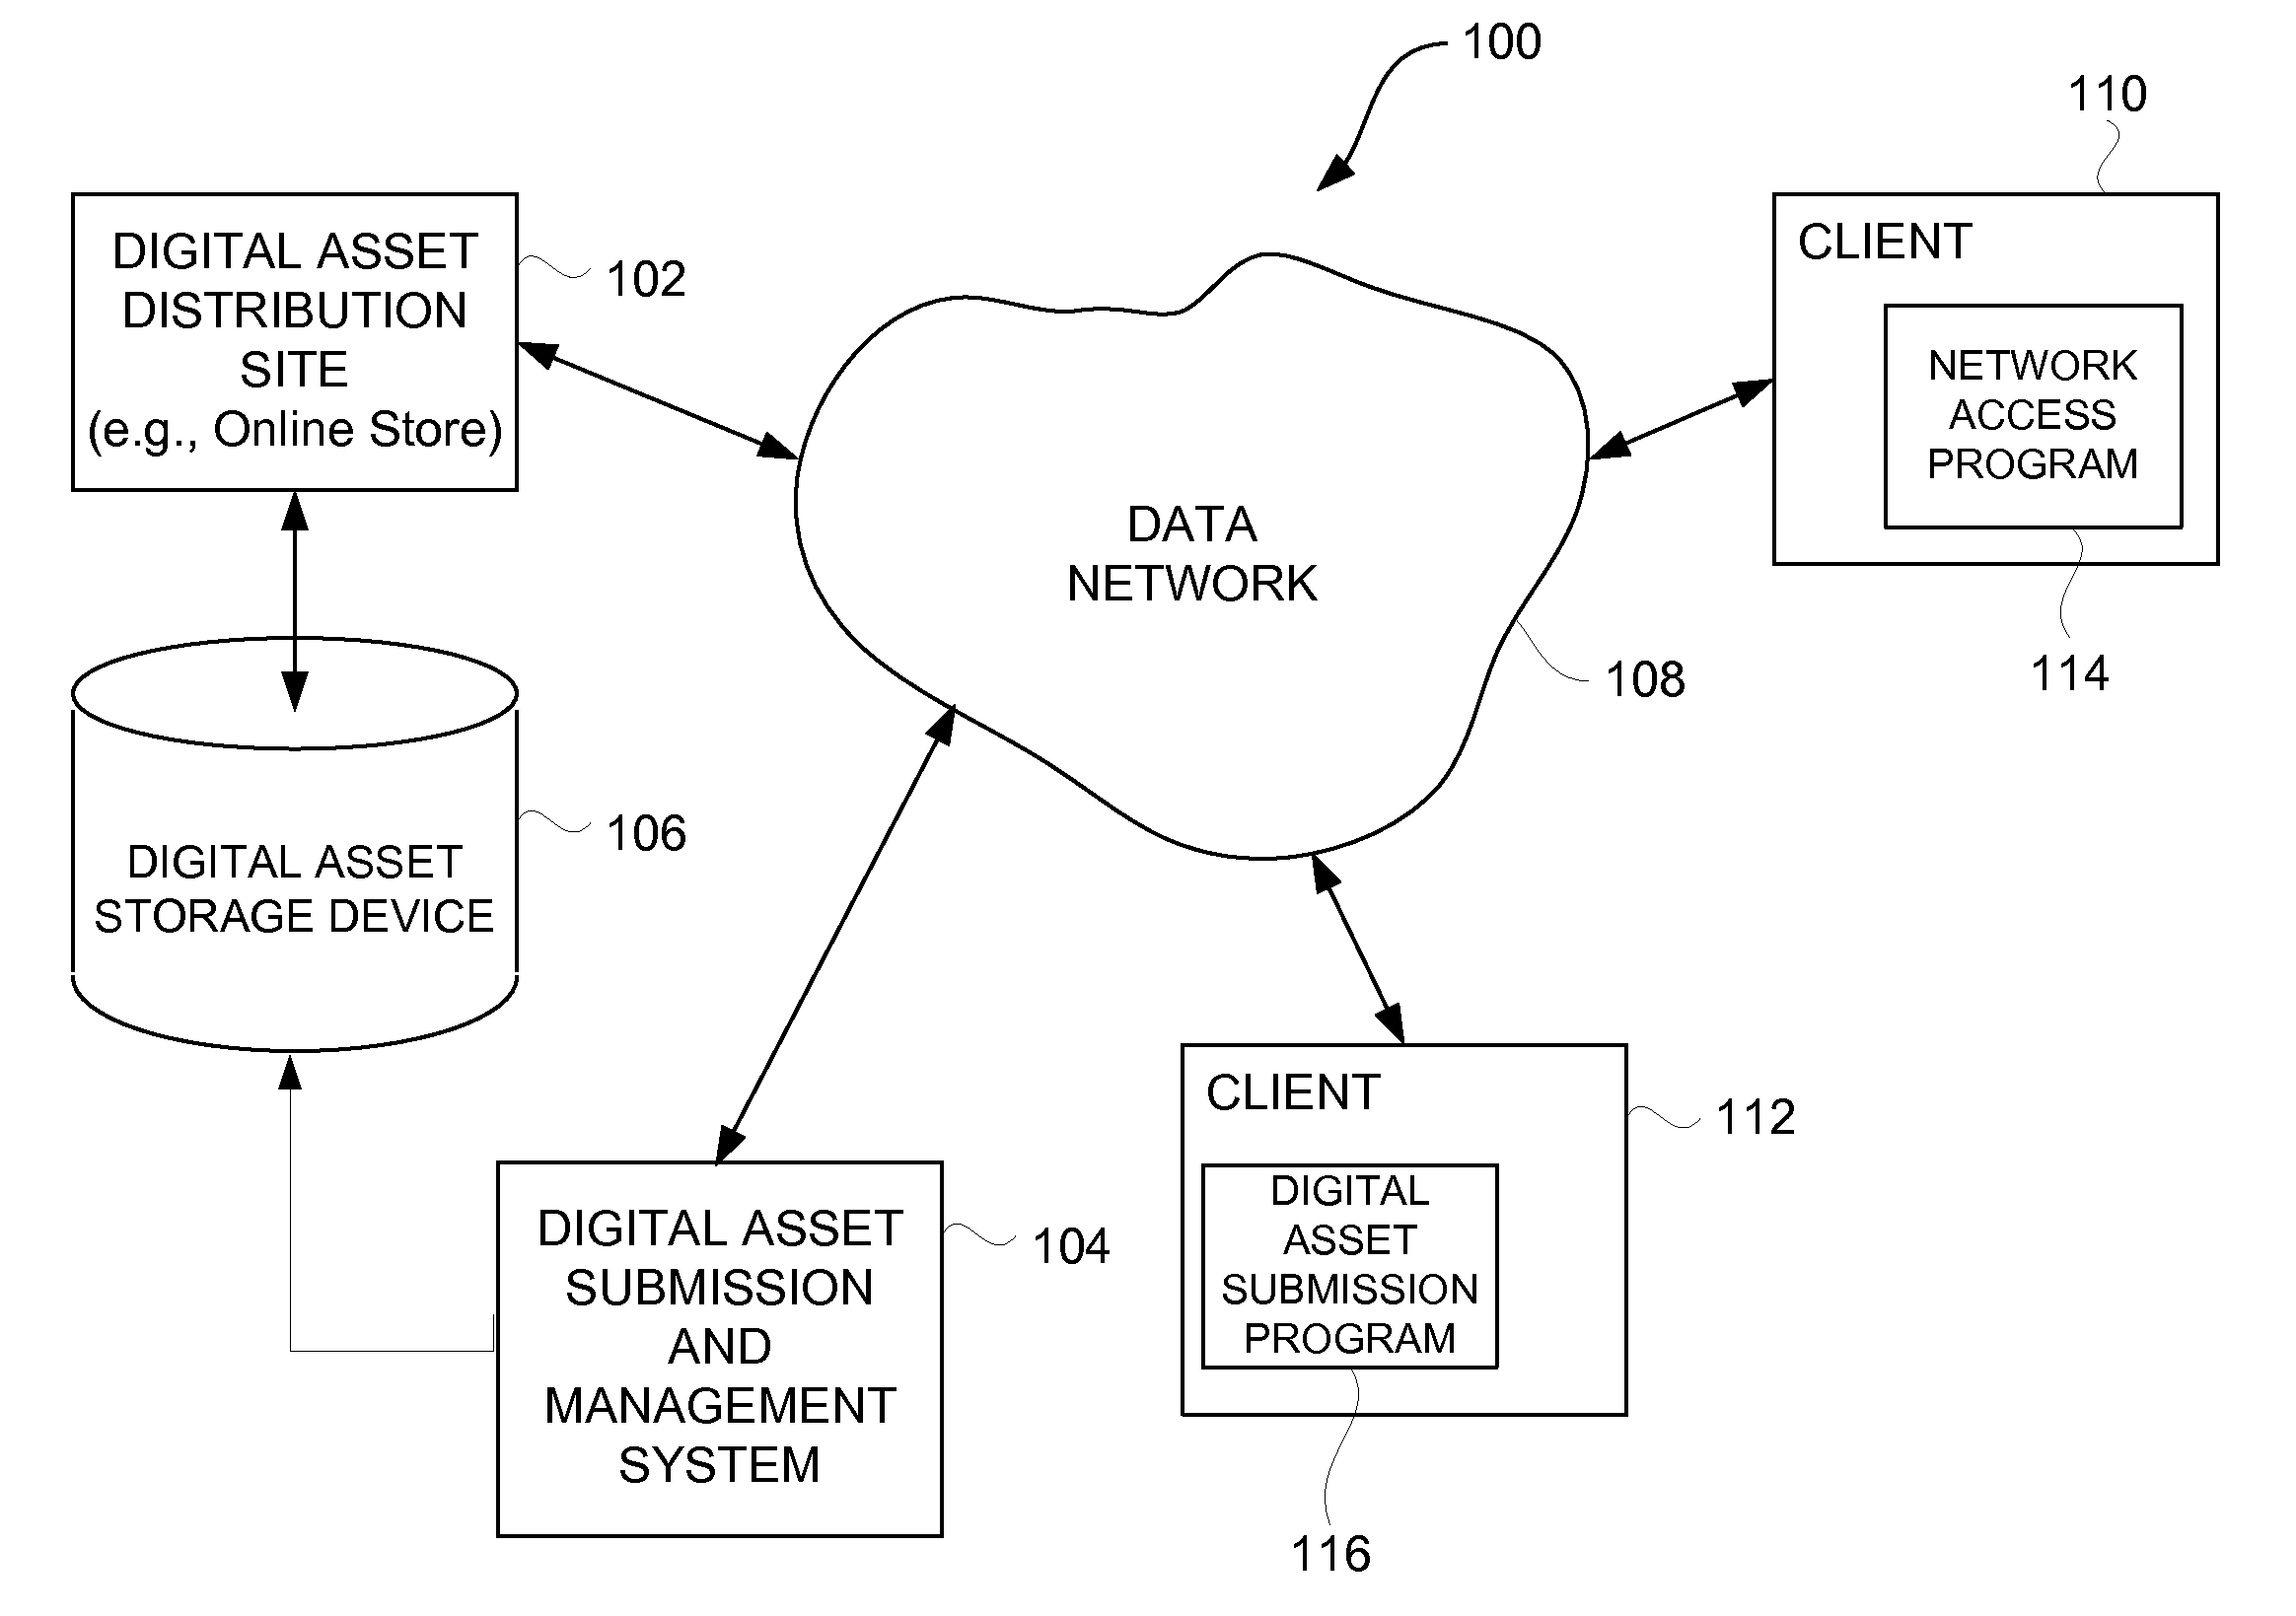 Digital asset validation prior to submission for network-based distribution